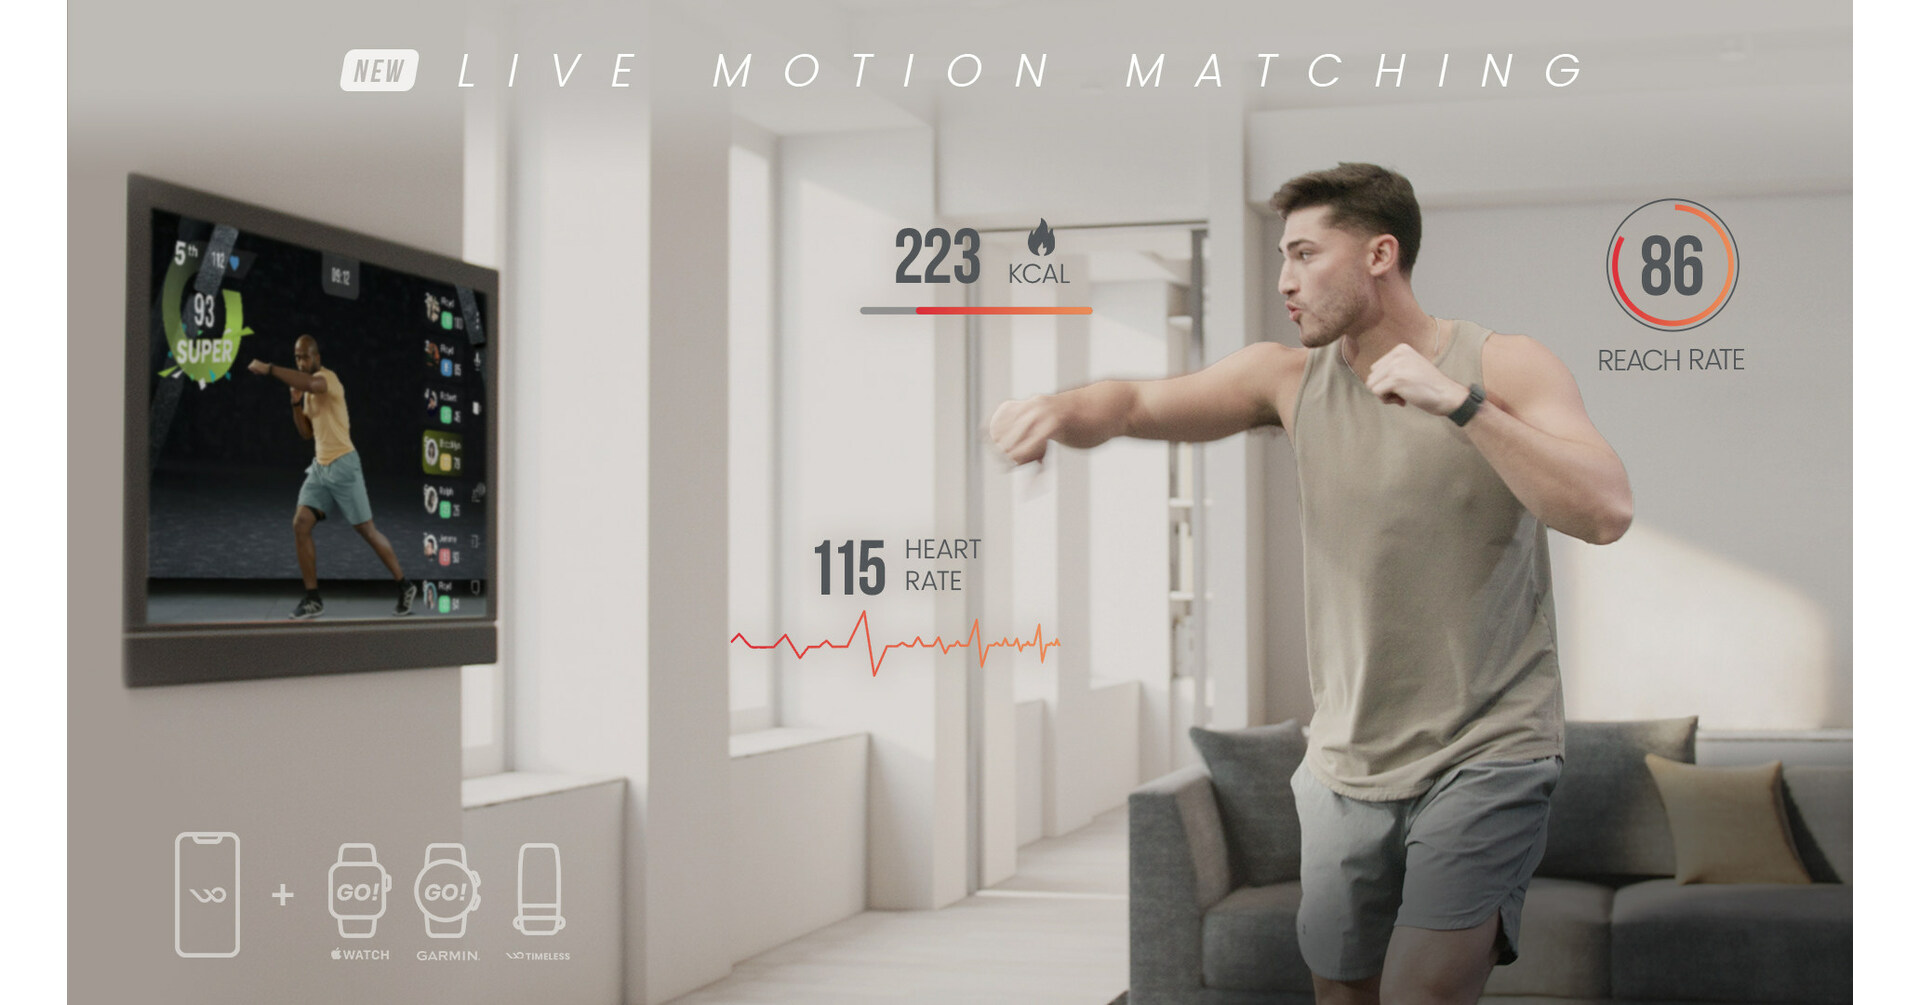 a breakthrough fitness experience with wearable devices and live content